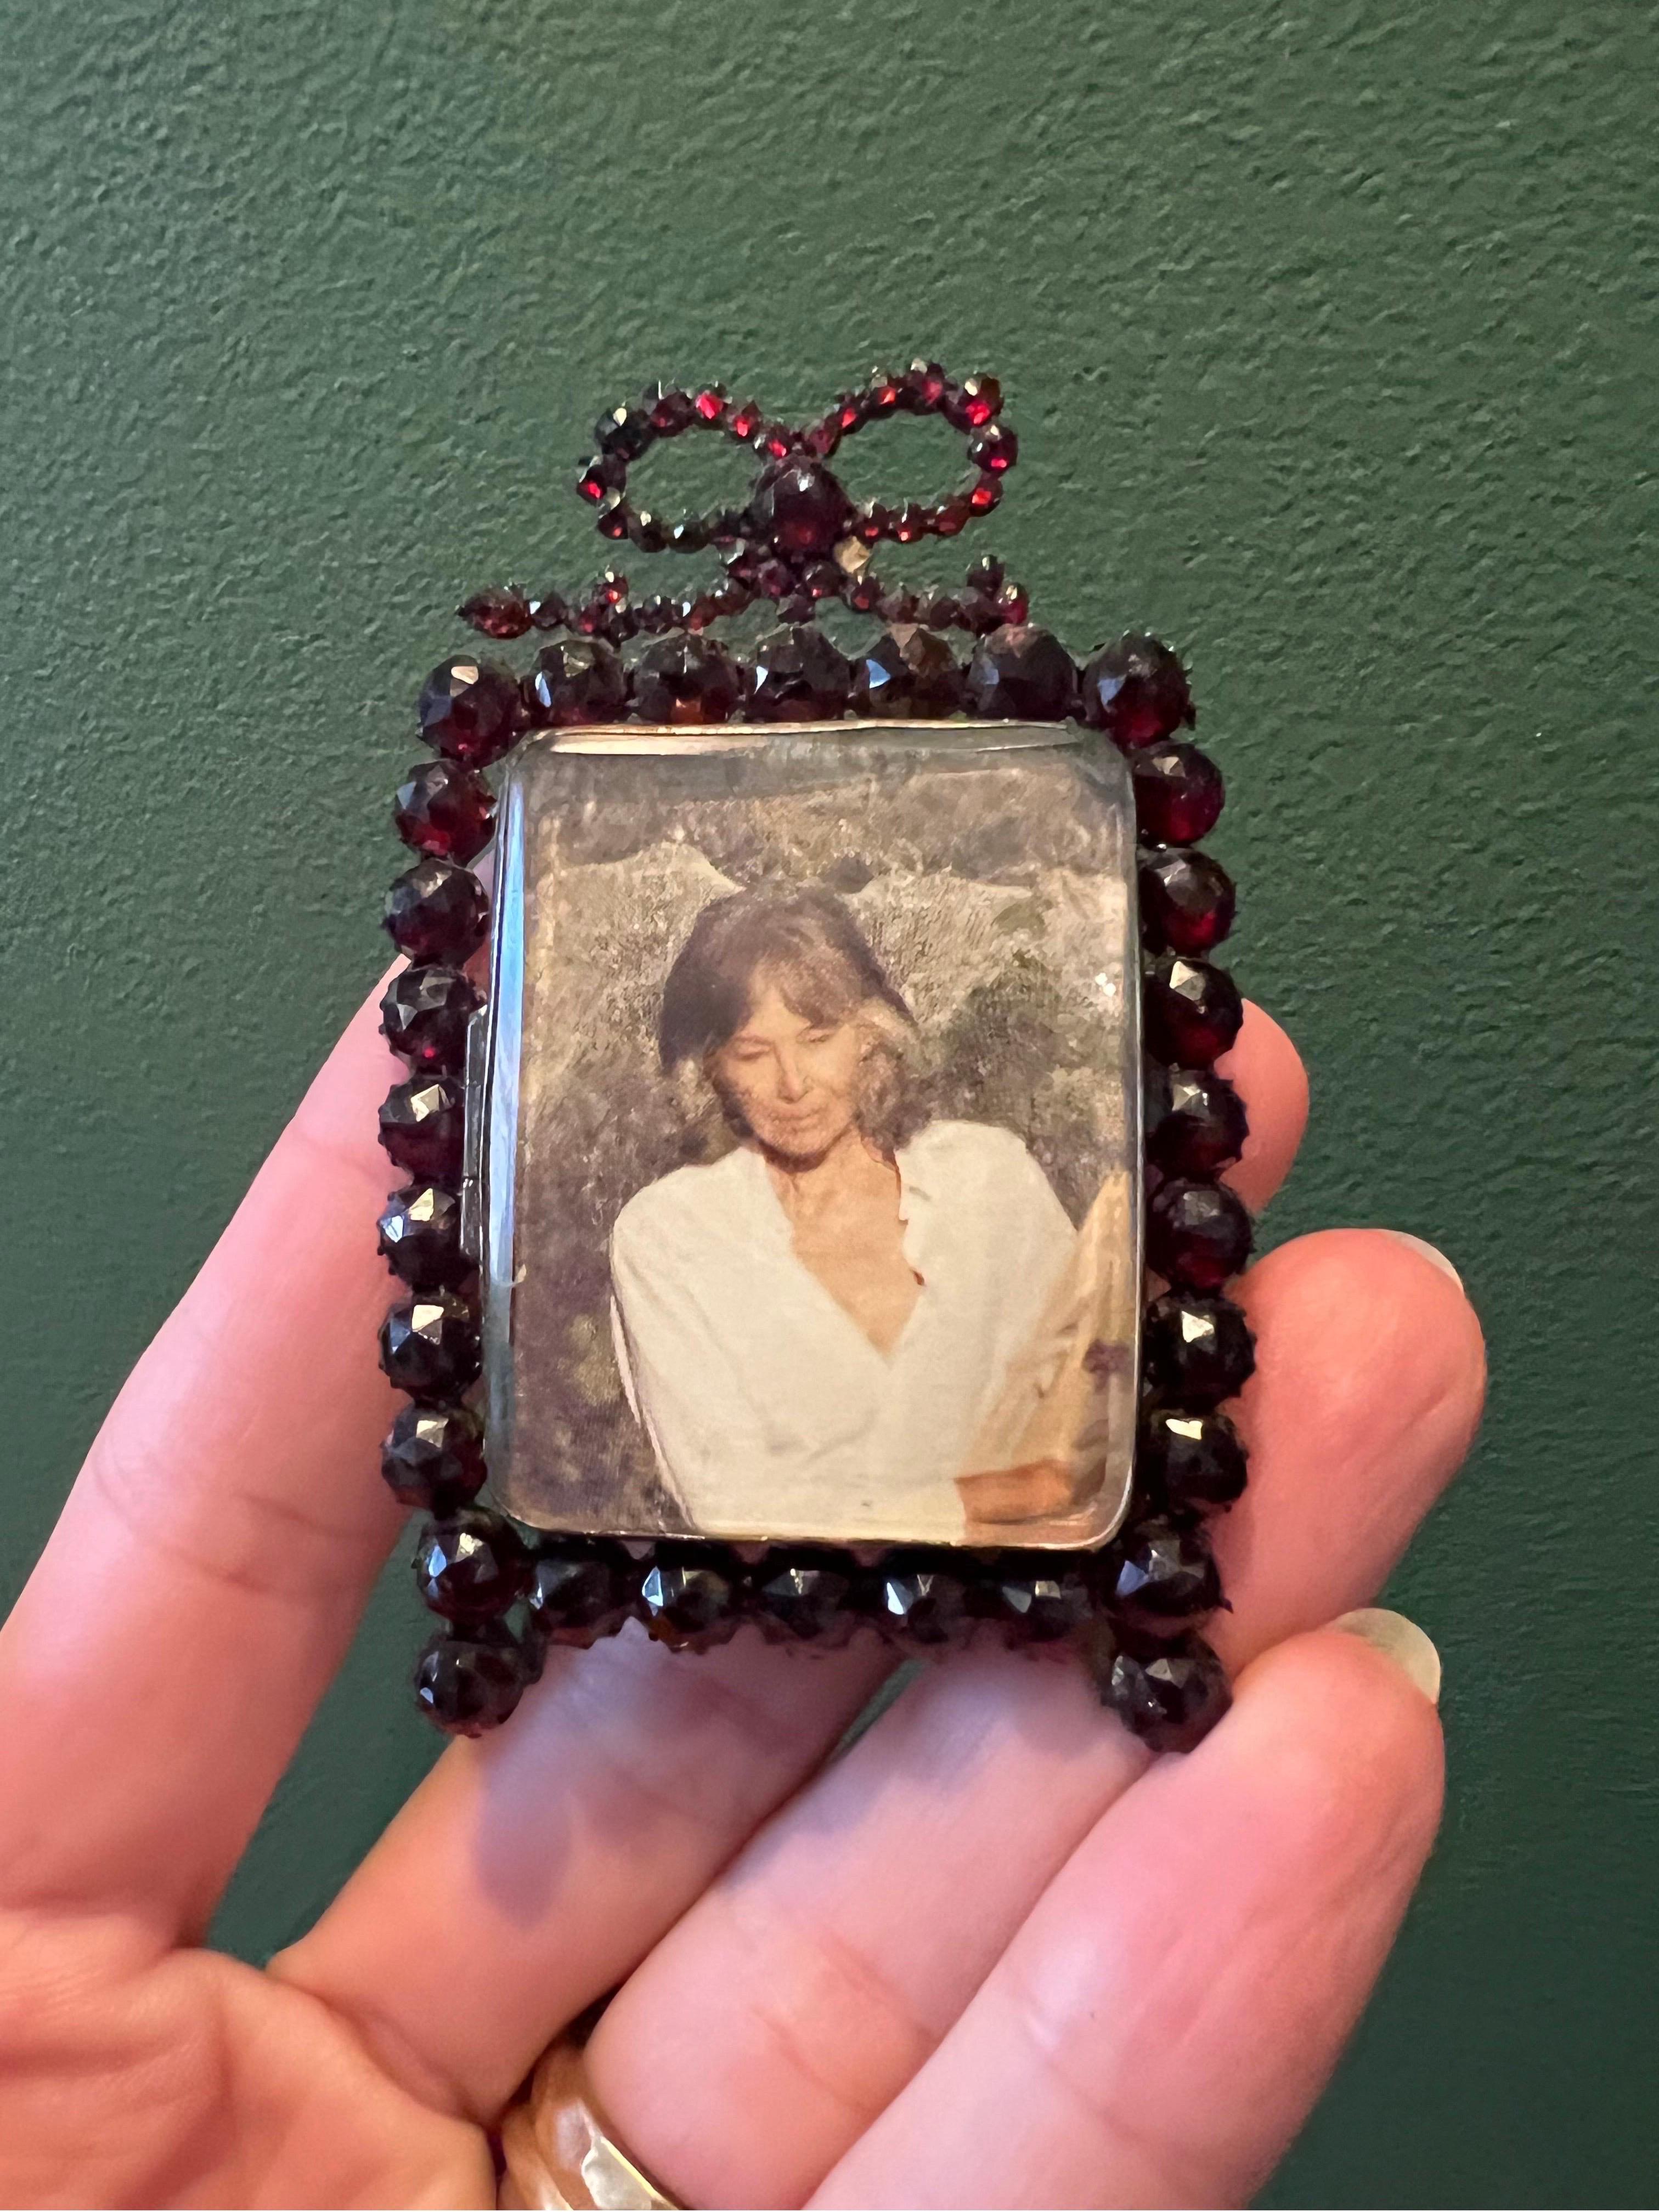 Mr. Giallo is opening his personal vault to sell a collection of his treasured antiques he's held on for so long.

ABOUT ITEM.
Such a special special frame made of antique garnets in sterling silver. This frame is meant to hold a very special